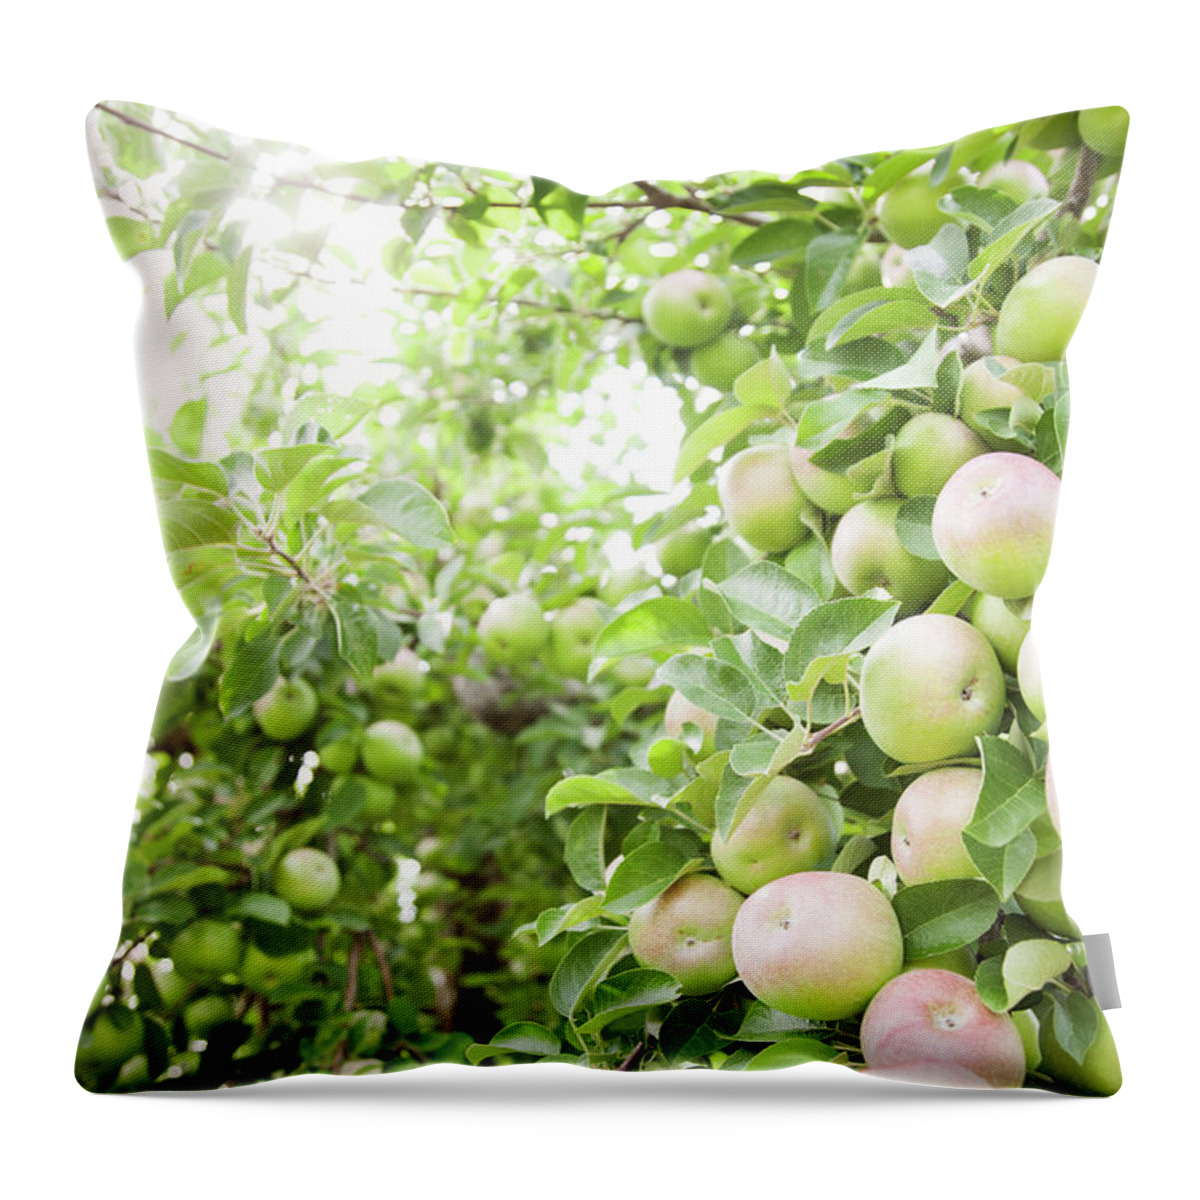 Outdoors Throw Pillow featuring the photograph Organic Apples Growing In Tree by Jacqueline Veissid